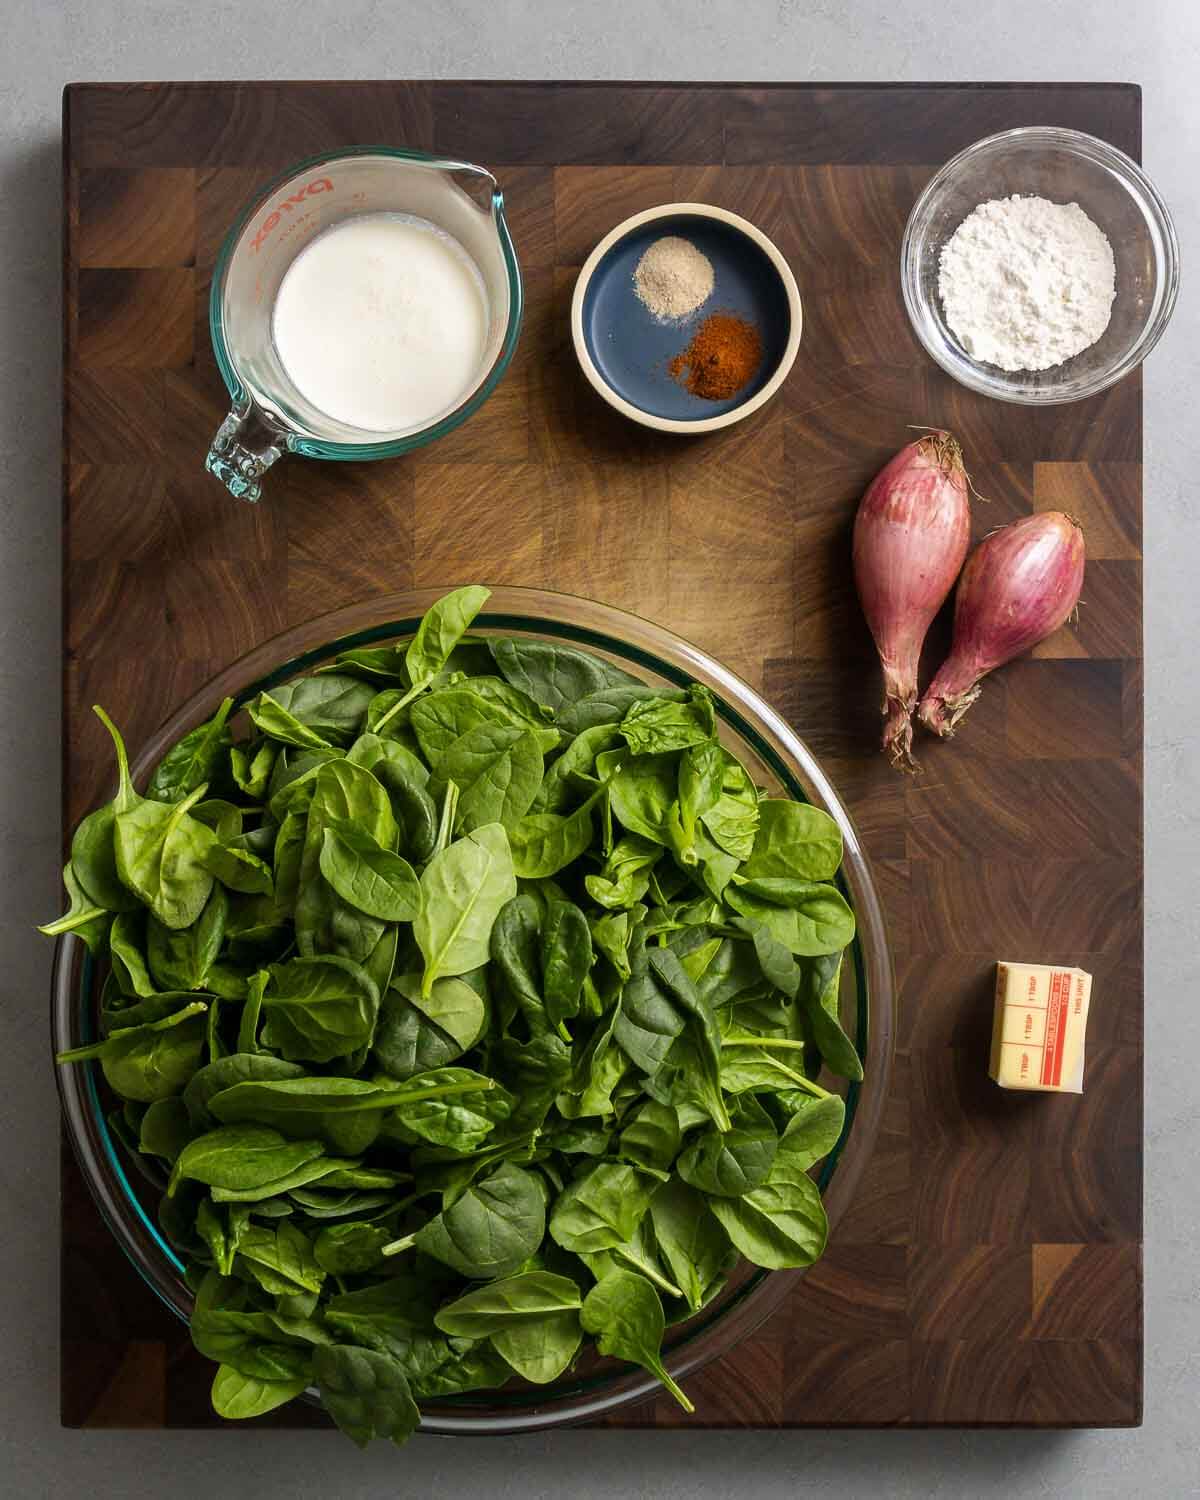 Ingredients shown: heavy cream, spices, flour, shallot, spinach, and butter.